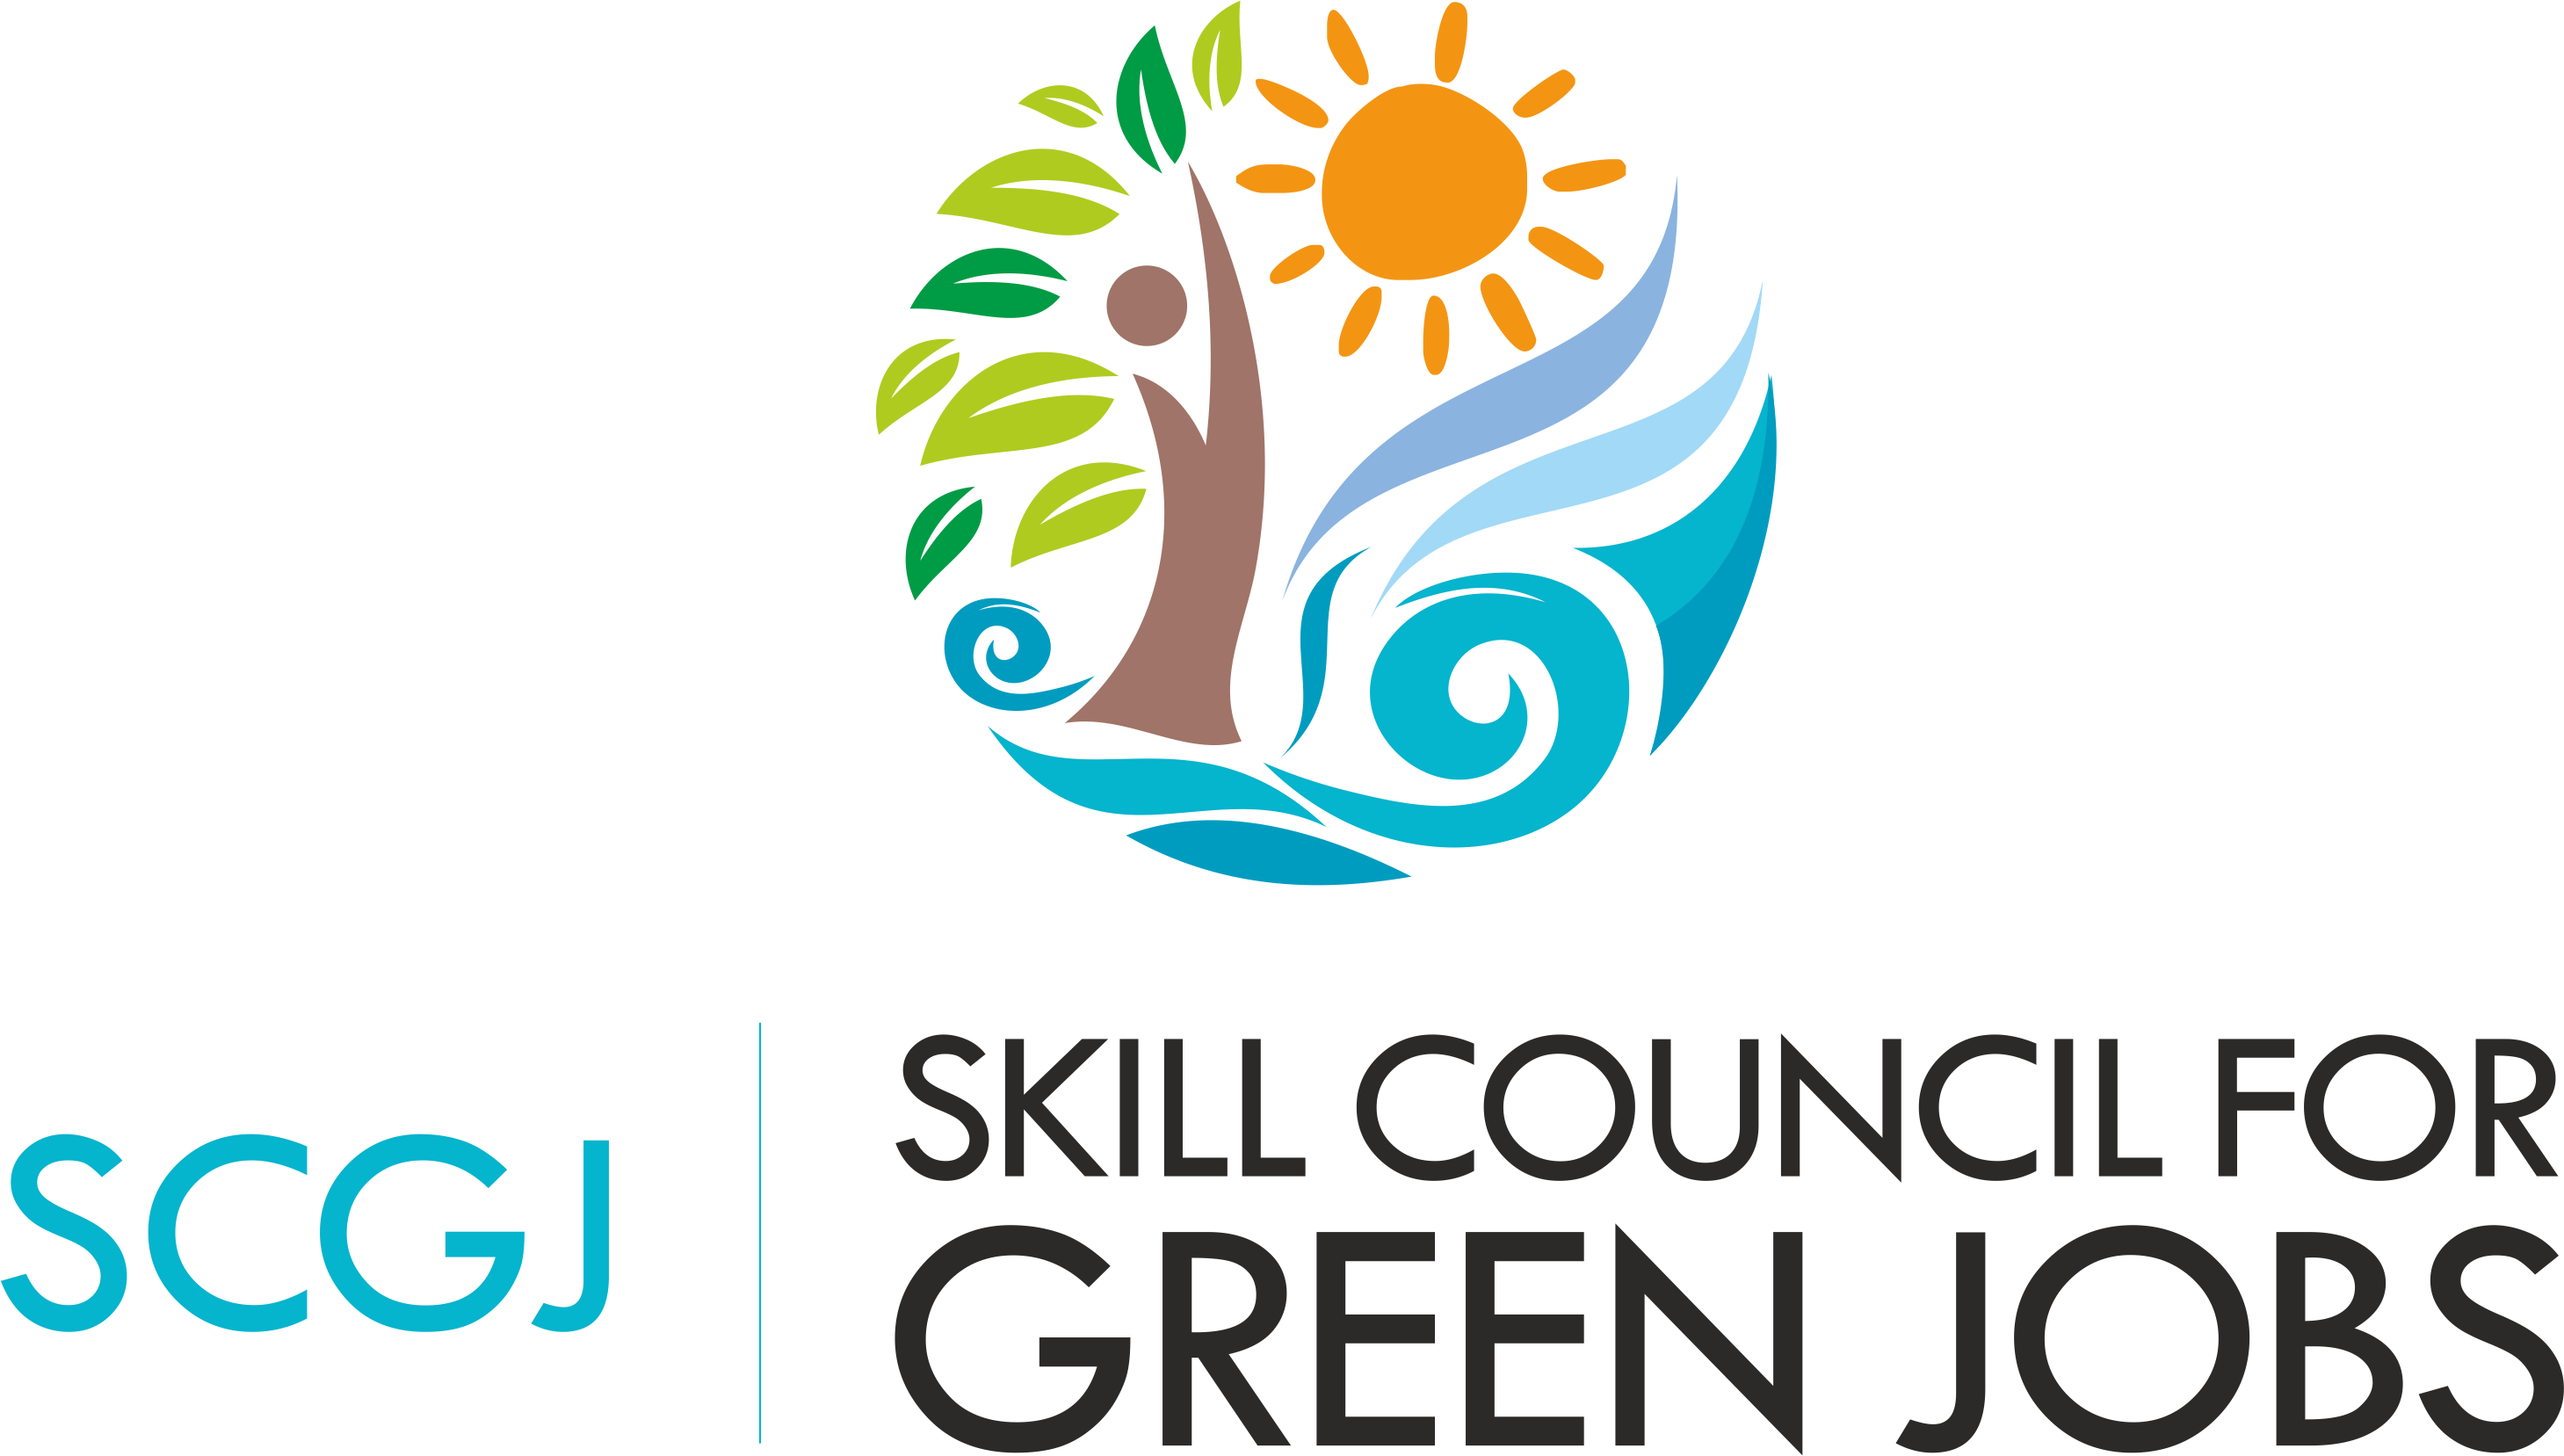 Skill Council for Green Jobs has been mandated by G overnment of India for providing skilled and certified manpower in Water Management Sector. ...